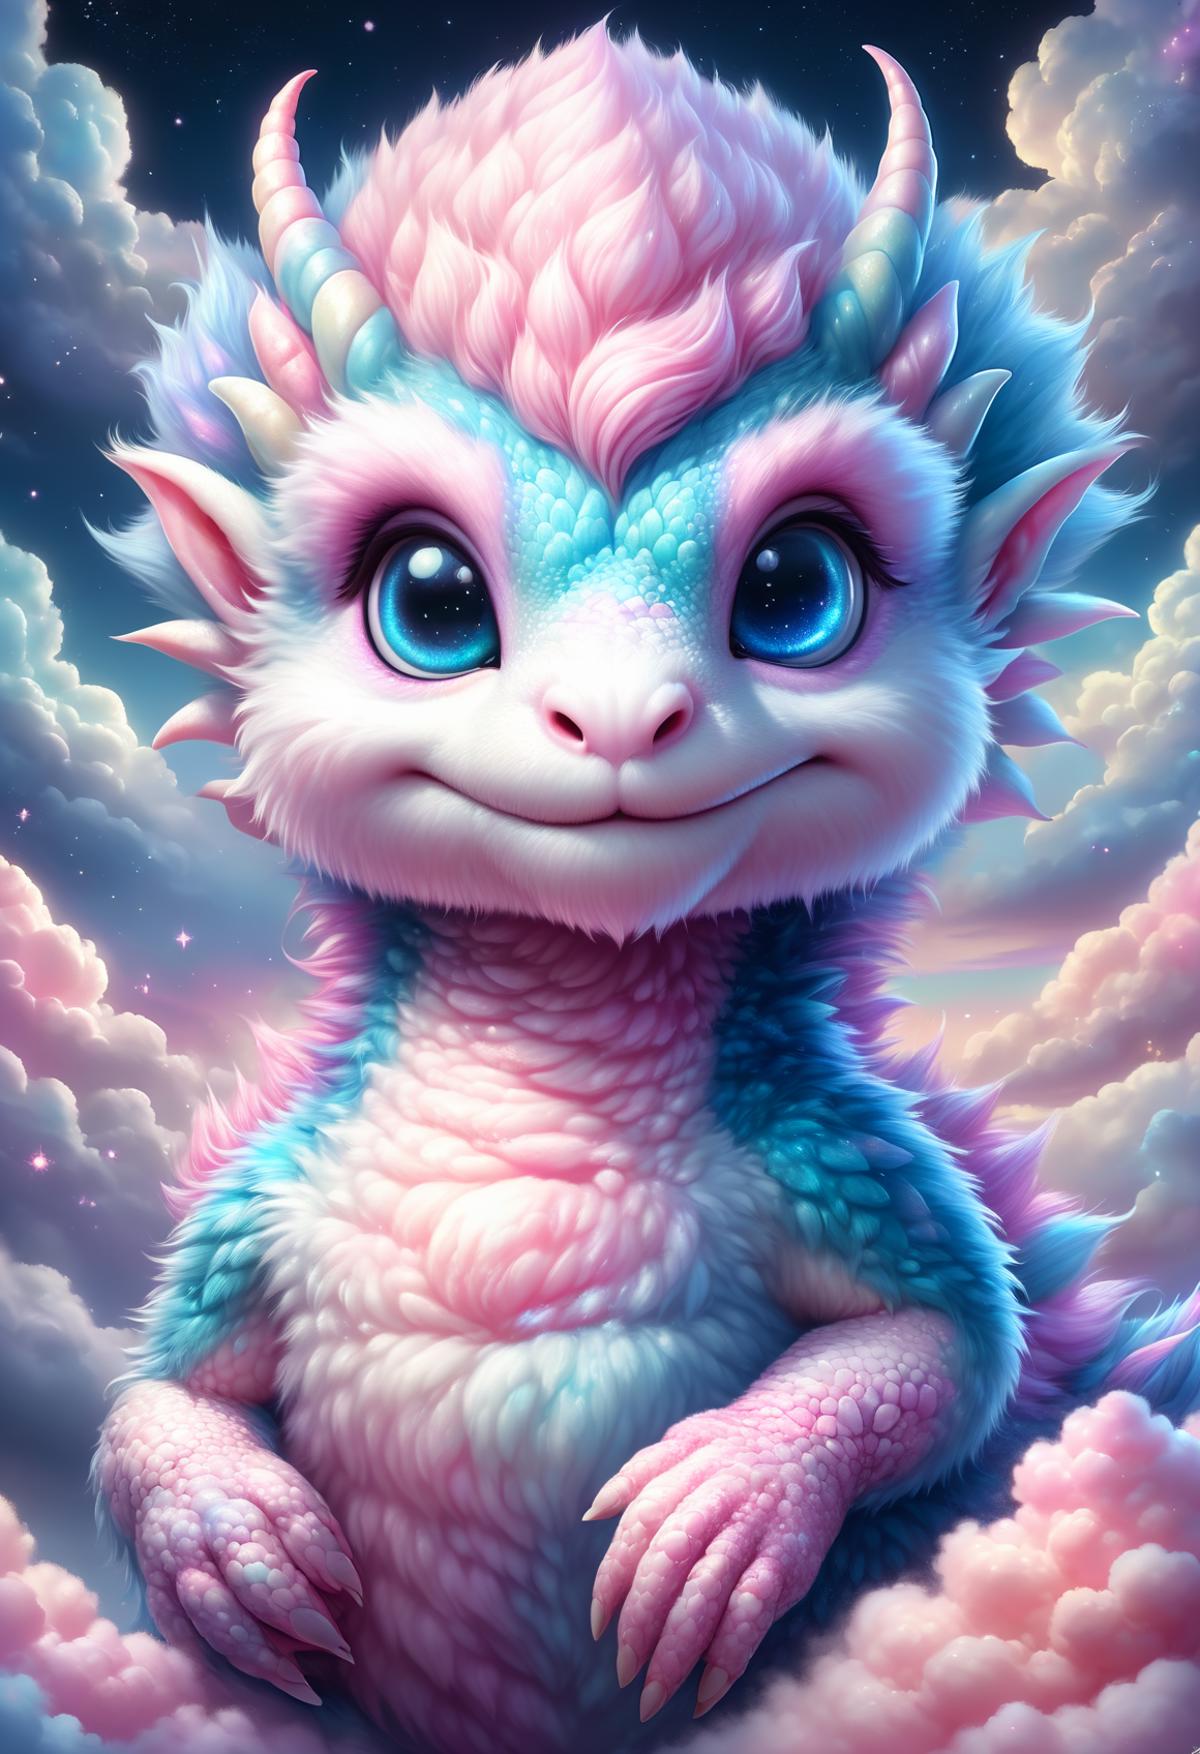 A pink and blue fluffy dragon with a big smile is sitting on a cloud.